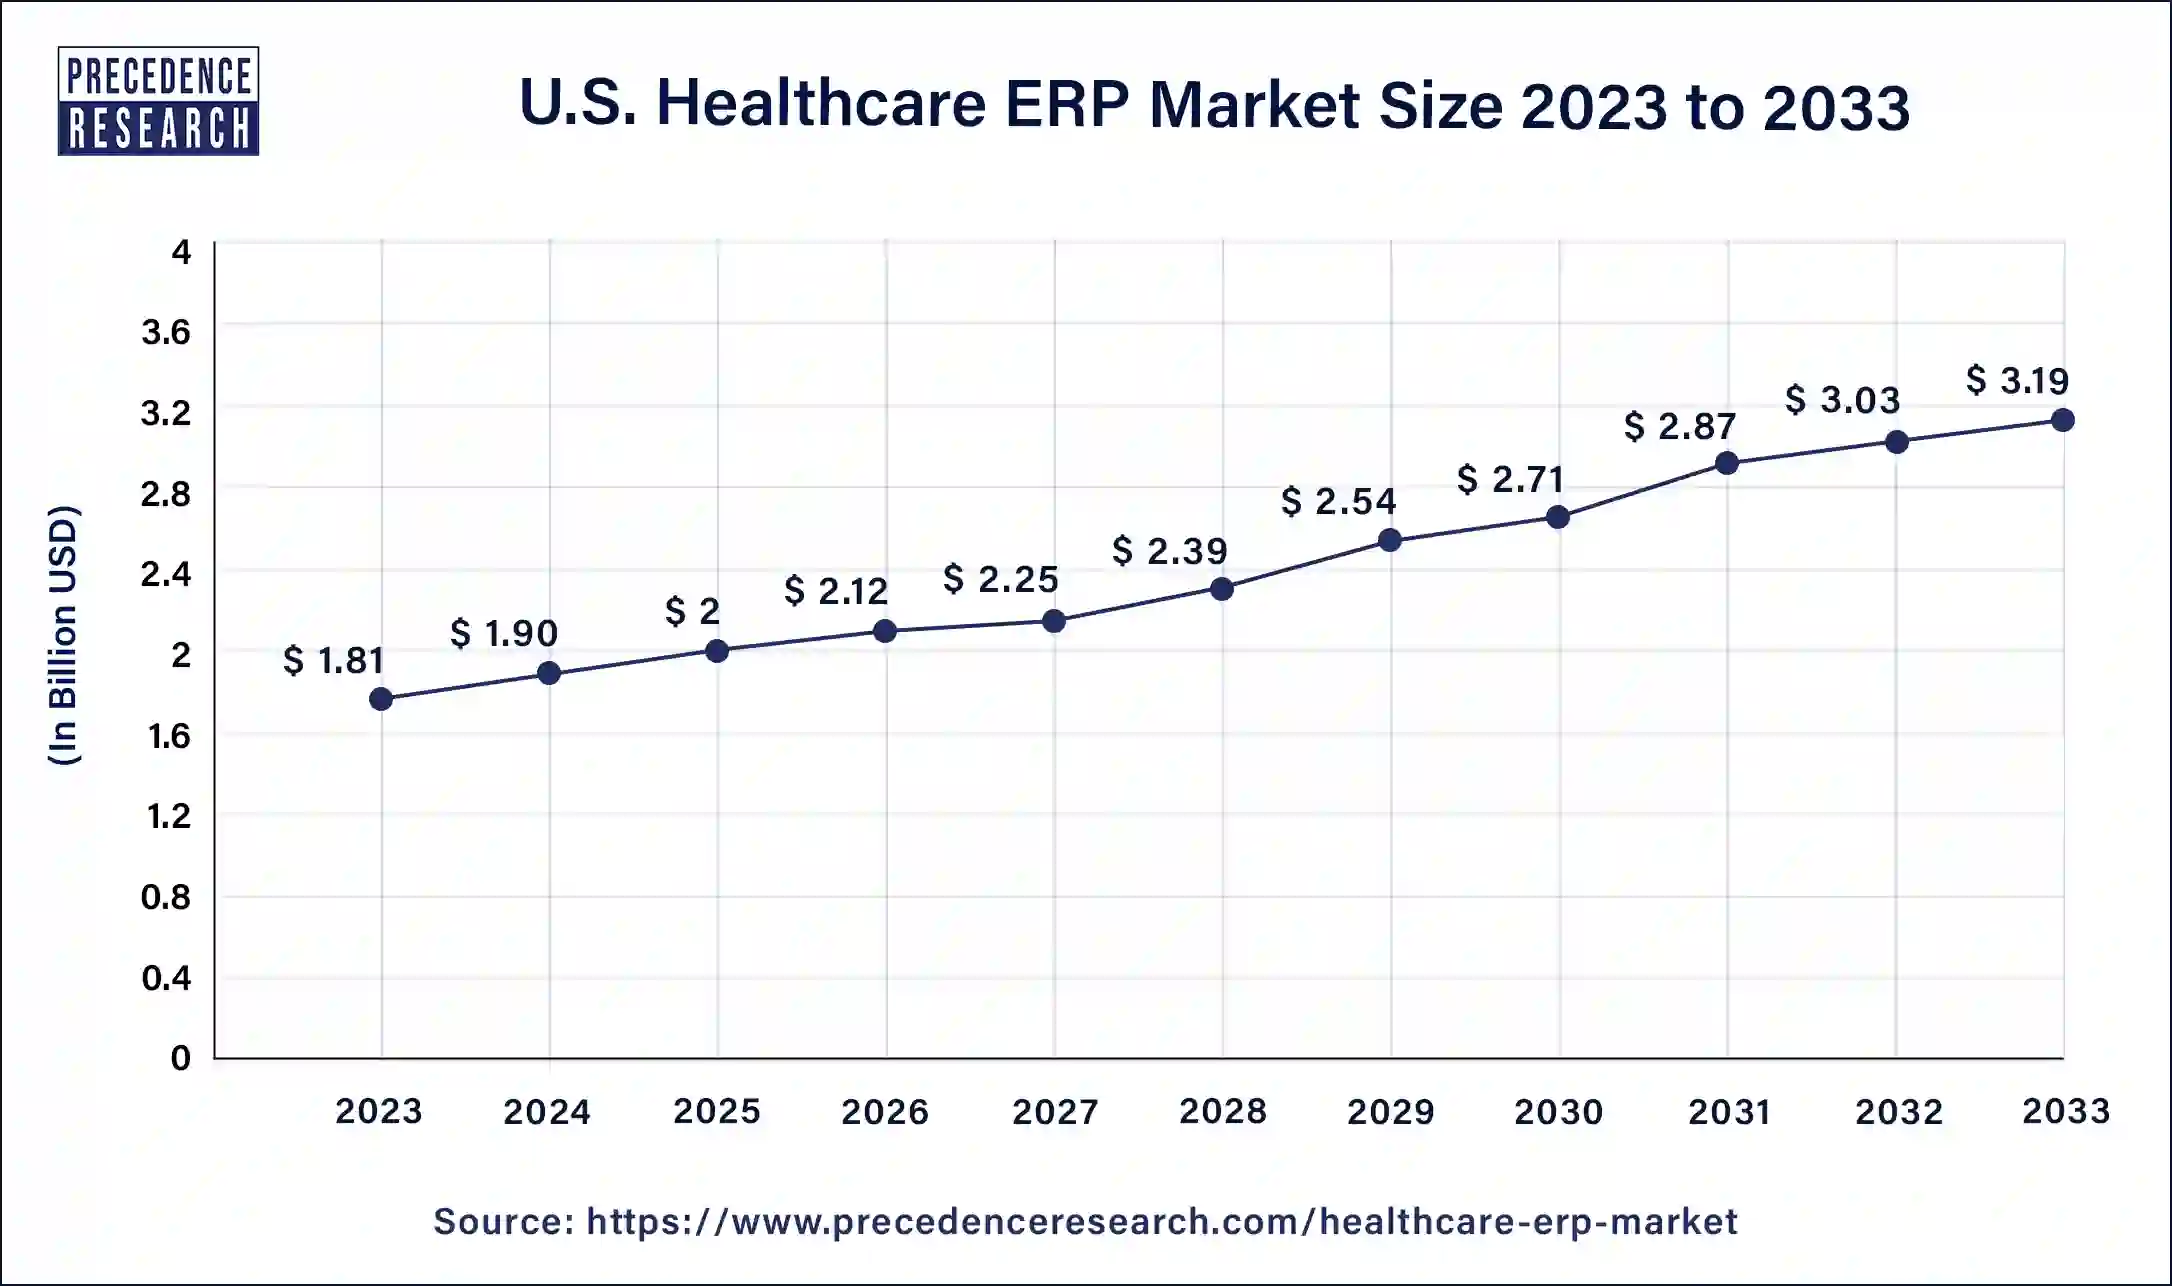 Healthcare ERP Market Size in U.S. 2024 To 2033